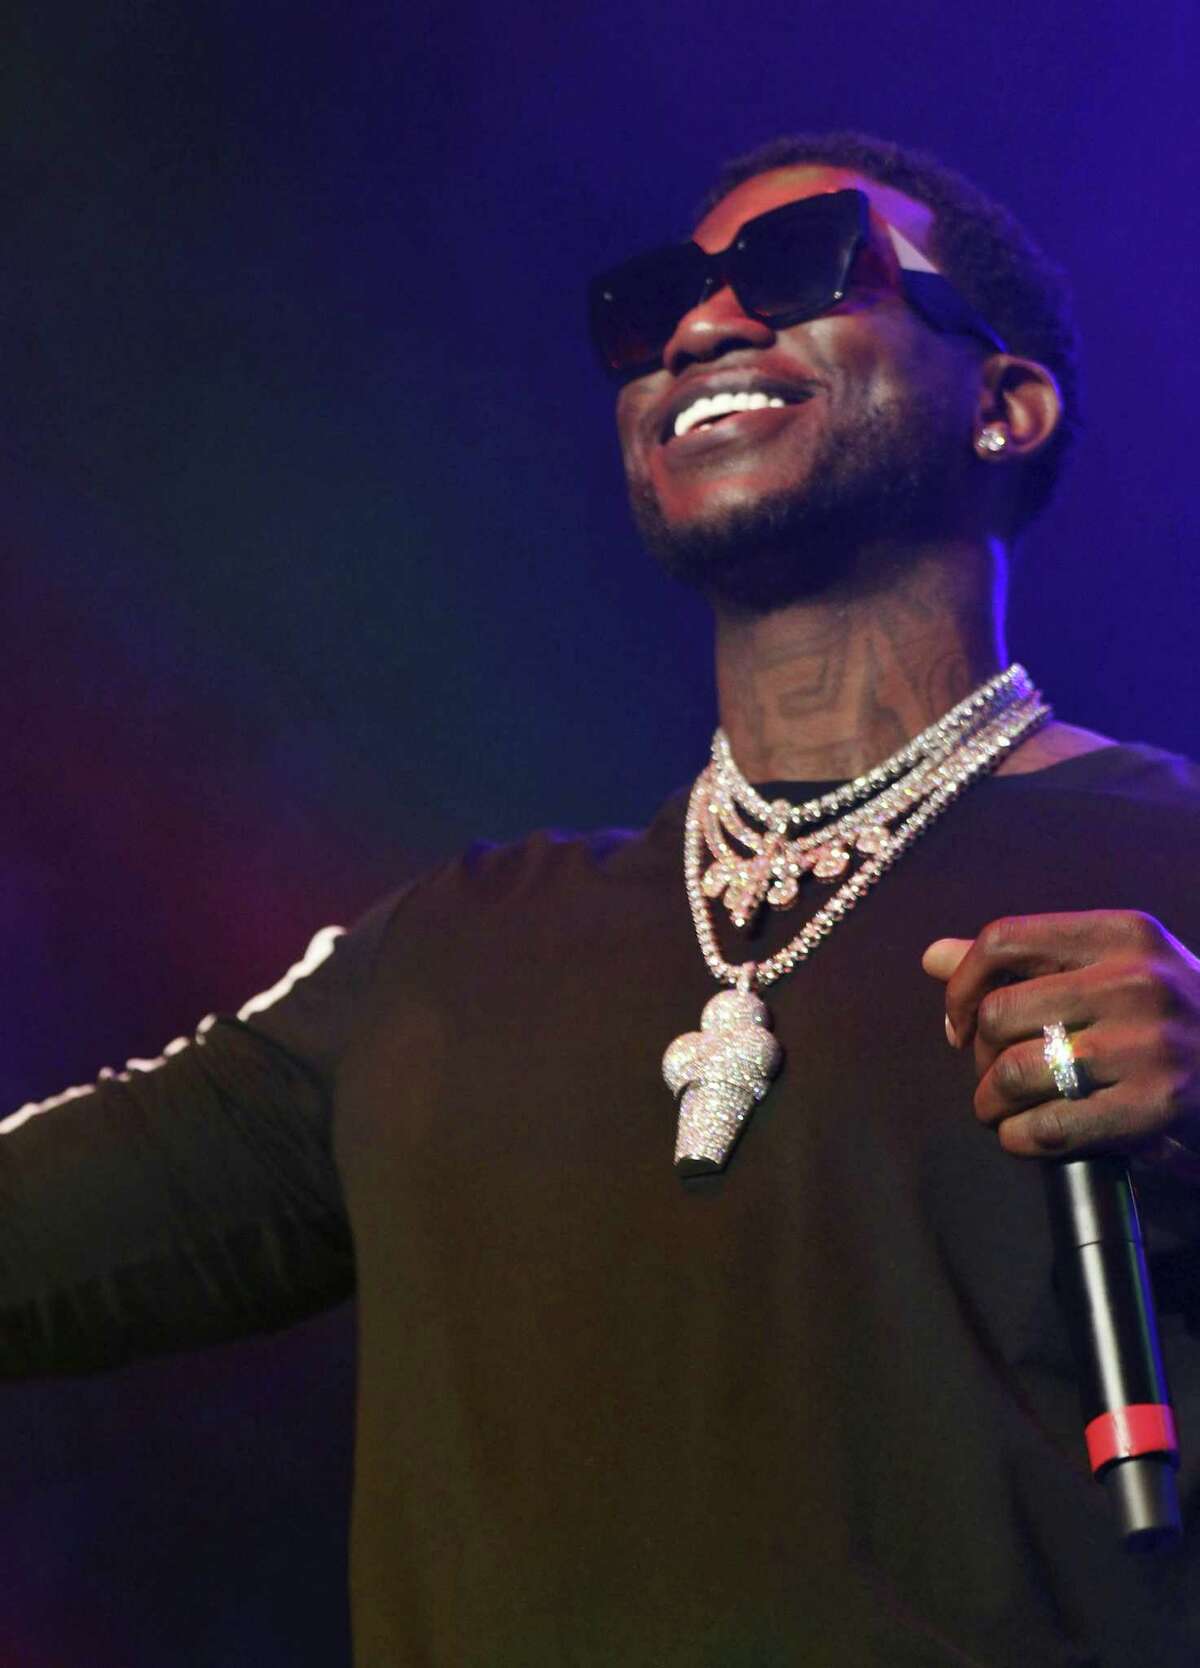 MANE ATTRACTION: Gucci Mane will perform at The Dome at Oakdale (95 S. Turnpike Road, Wallingford) on Friday at 8 p.m. Tickets are $44.50-$99.50. See oakdale.com or call Charge By Phone at 800-745-3000.